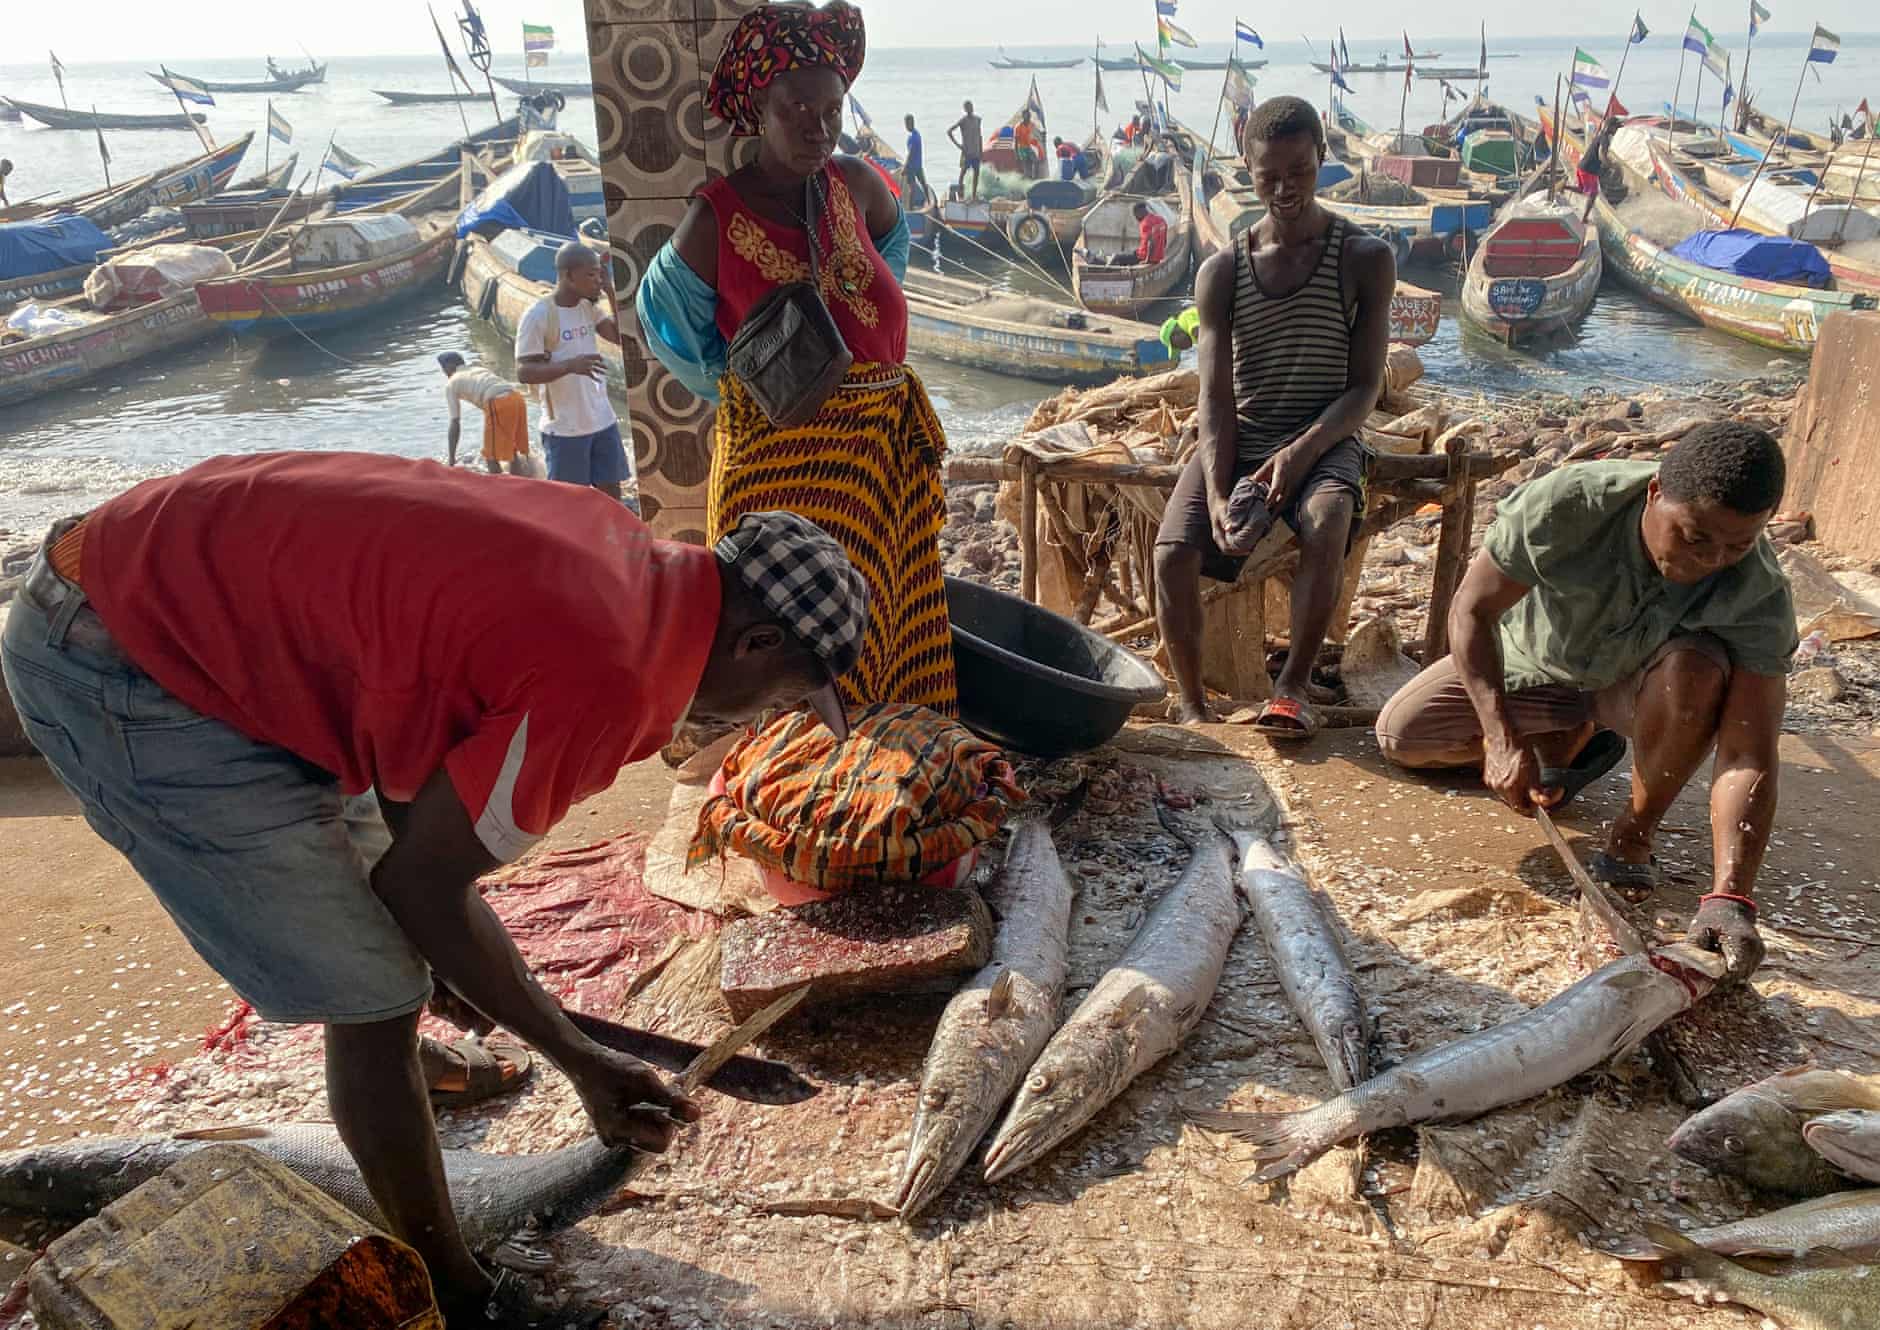 Illegal Overfishing by Chinese Trawlers Leaves Sierra Leone Locals ‘Starving’ – The Guardian